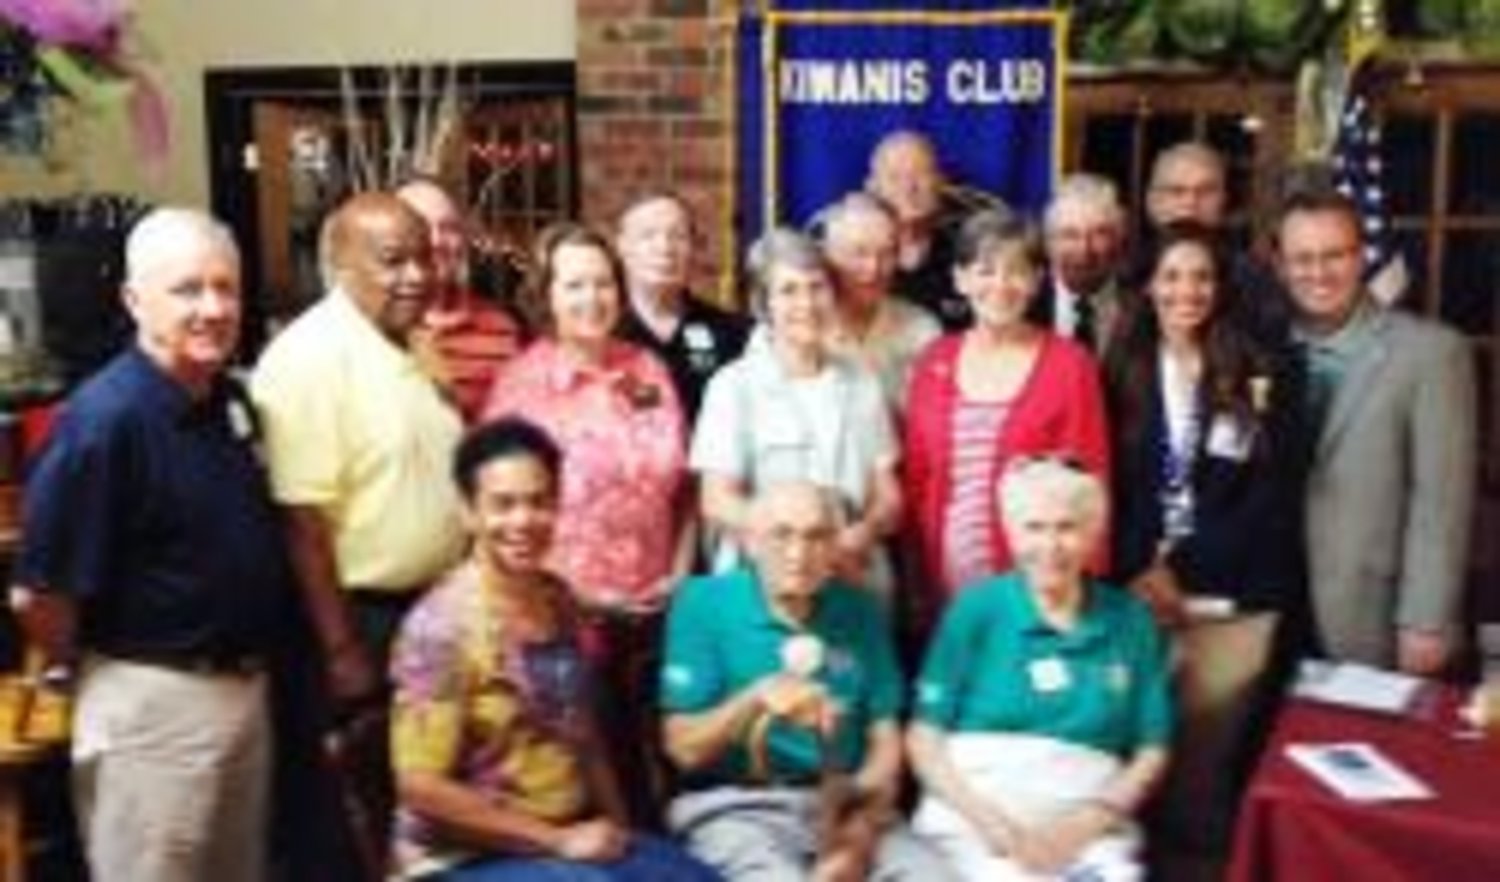 Representatives from the Kiwanis Clubs of Tyler-Rose City, Hideaway, Mineola, Van, Quitman, Gilmer and Holly Lake Ranch